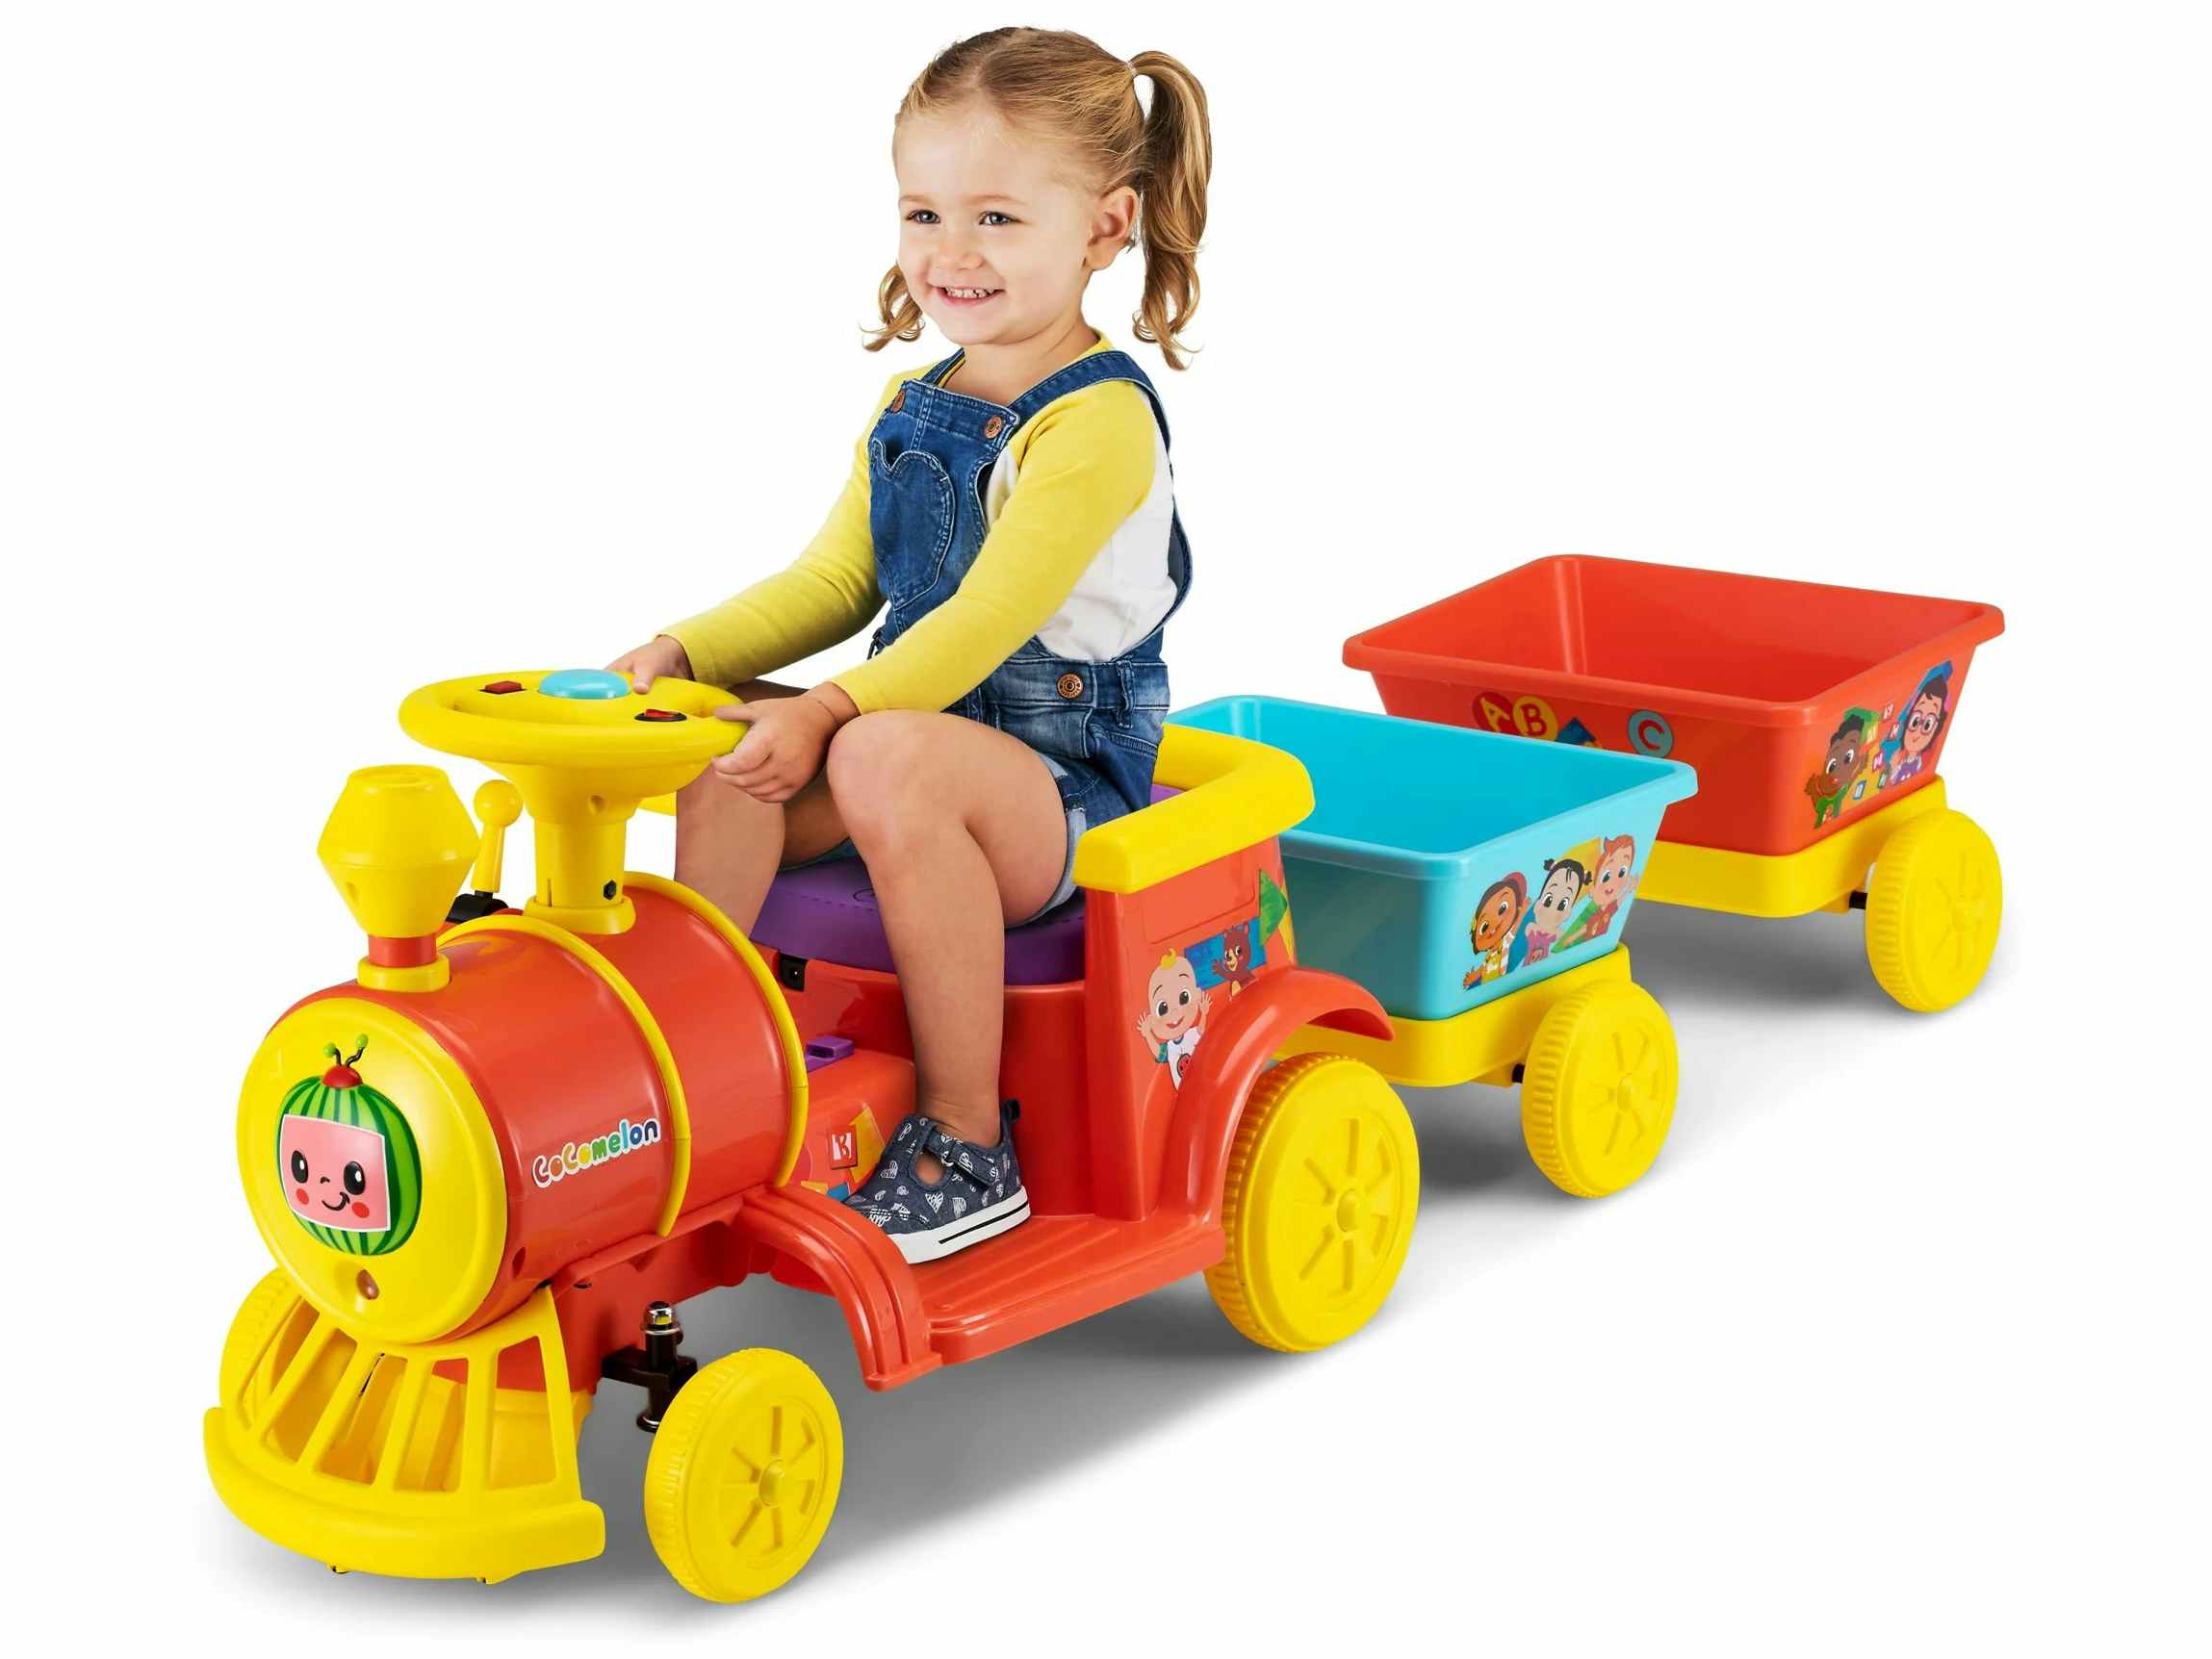 https://prod-cdn-thekrazycouponlady.imgix.net/wp-content/uploads/2017/09/best-toy-gifts-for-holidays-2023-cocomelon-choo-choo-train-ride-on-toy-walmart-1695997614-1695997614.jpeg?auto=format&fit=fill&q=25